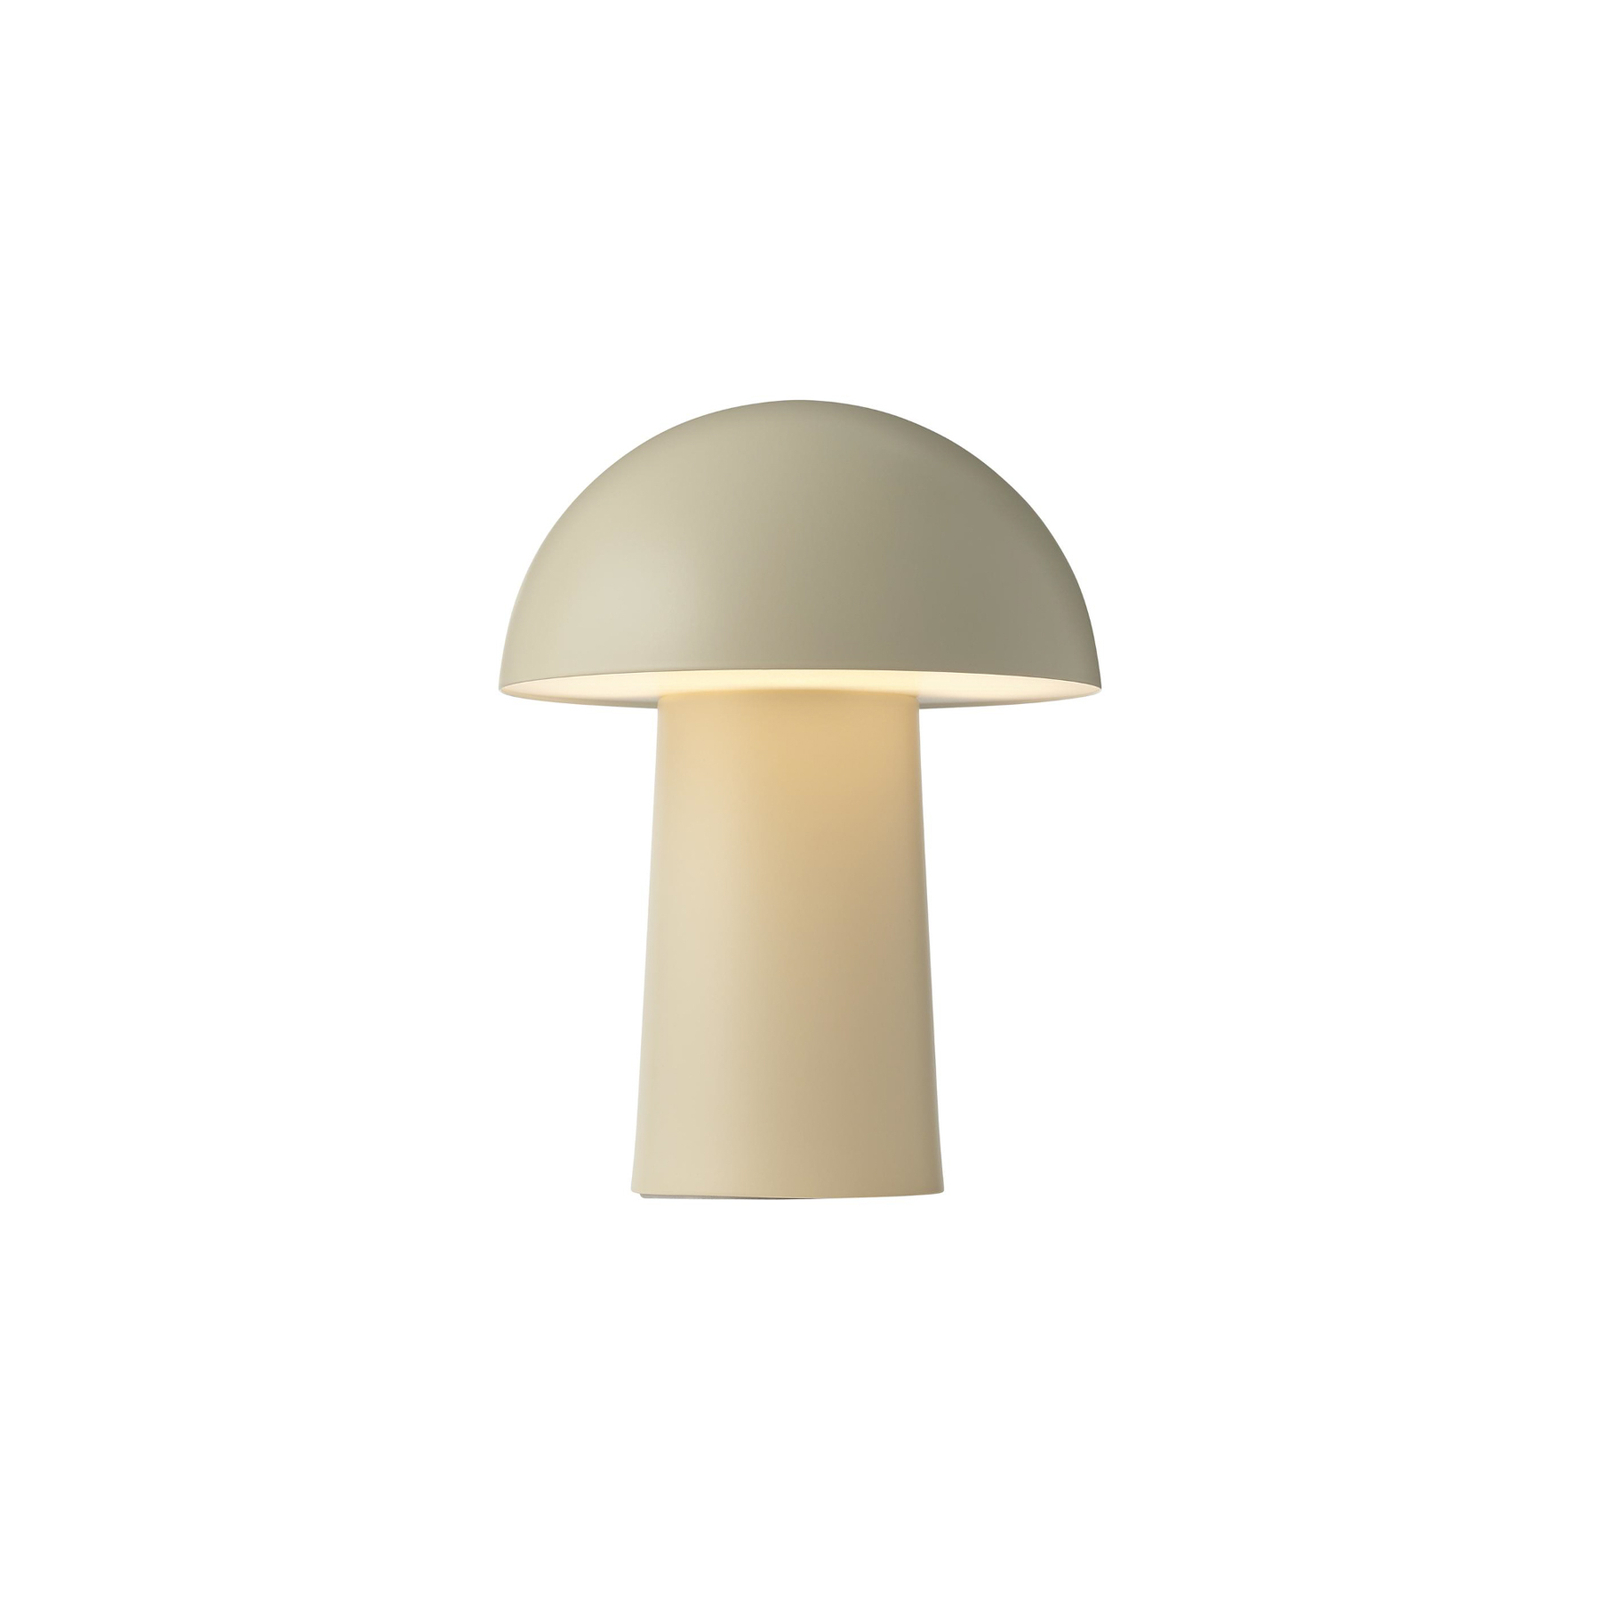 LED rechargeable table lamp Faye Portable, beige, dimmable, USB